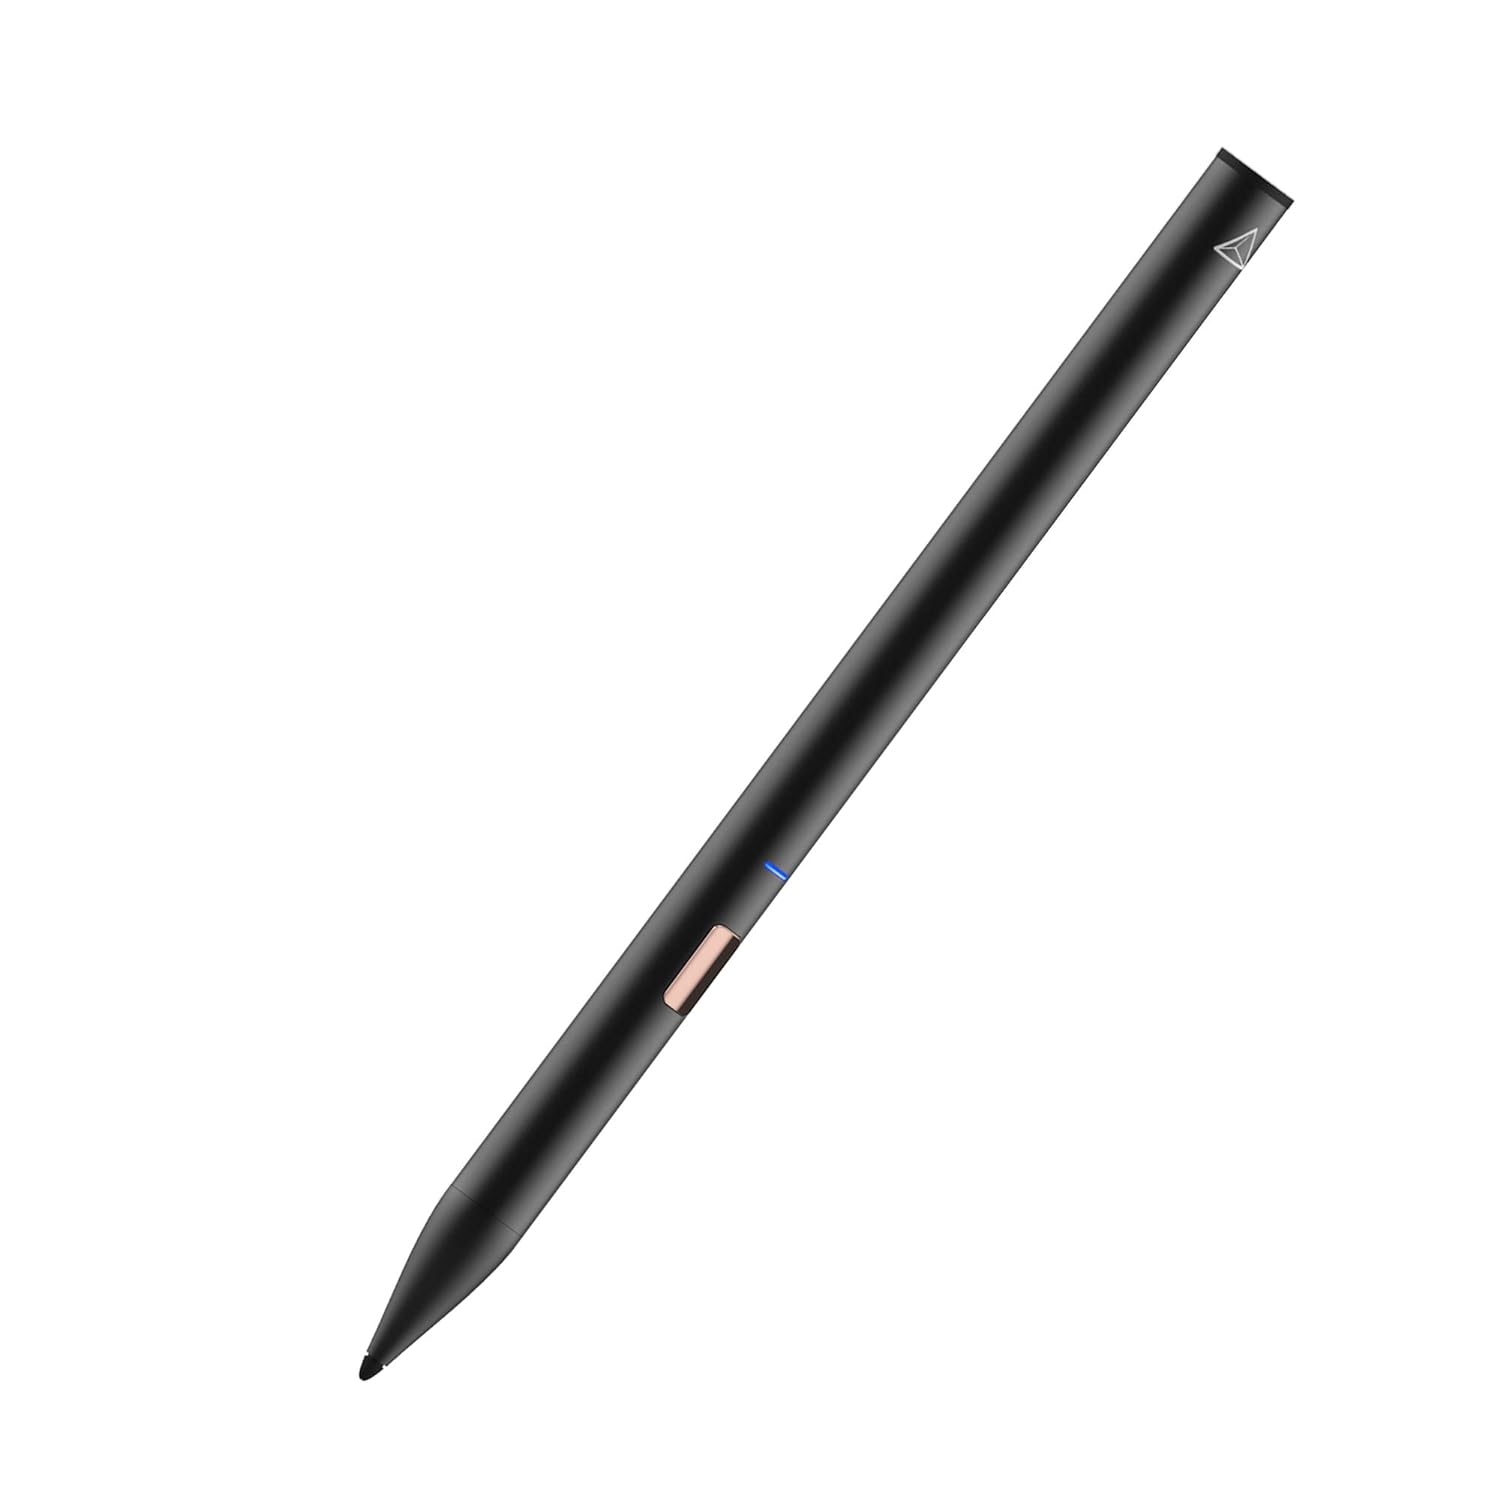 Adonit Note2 (Black) Dust-Proof and Waterproof Stylus Pen for iPad Precise Writing/Drawing with Palm Rejection, 24 Hours Standby Compatible with iPad Pro, iPad, iPad Mini, iPad Air